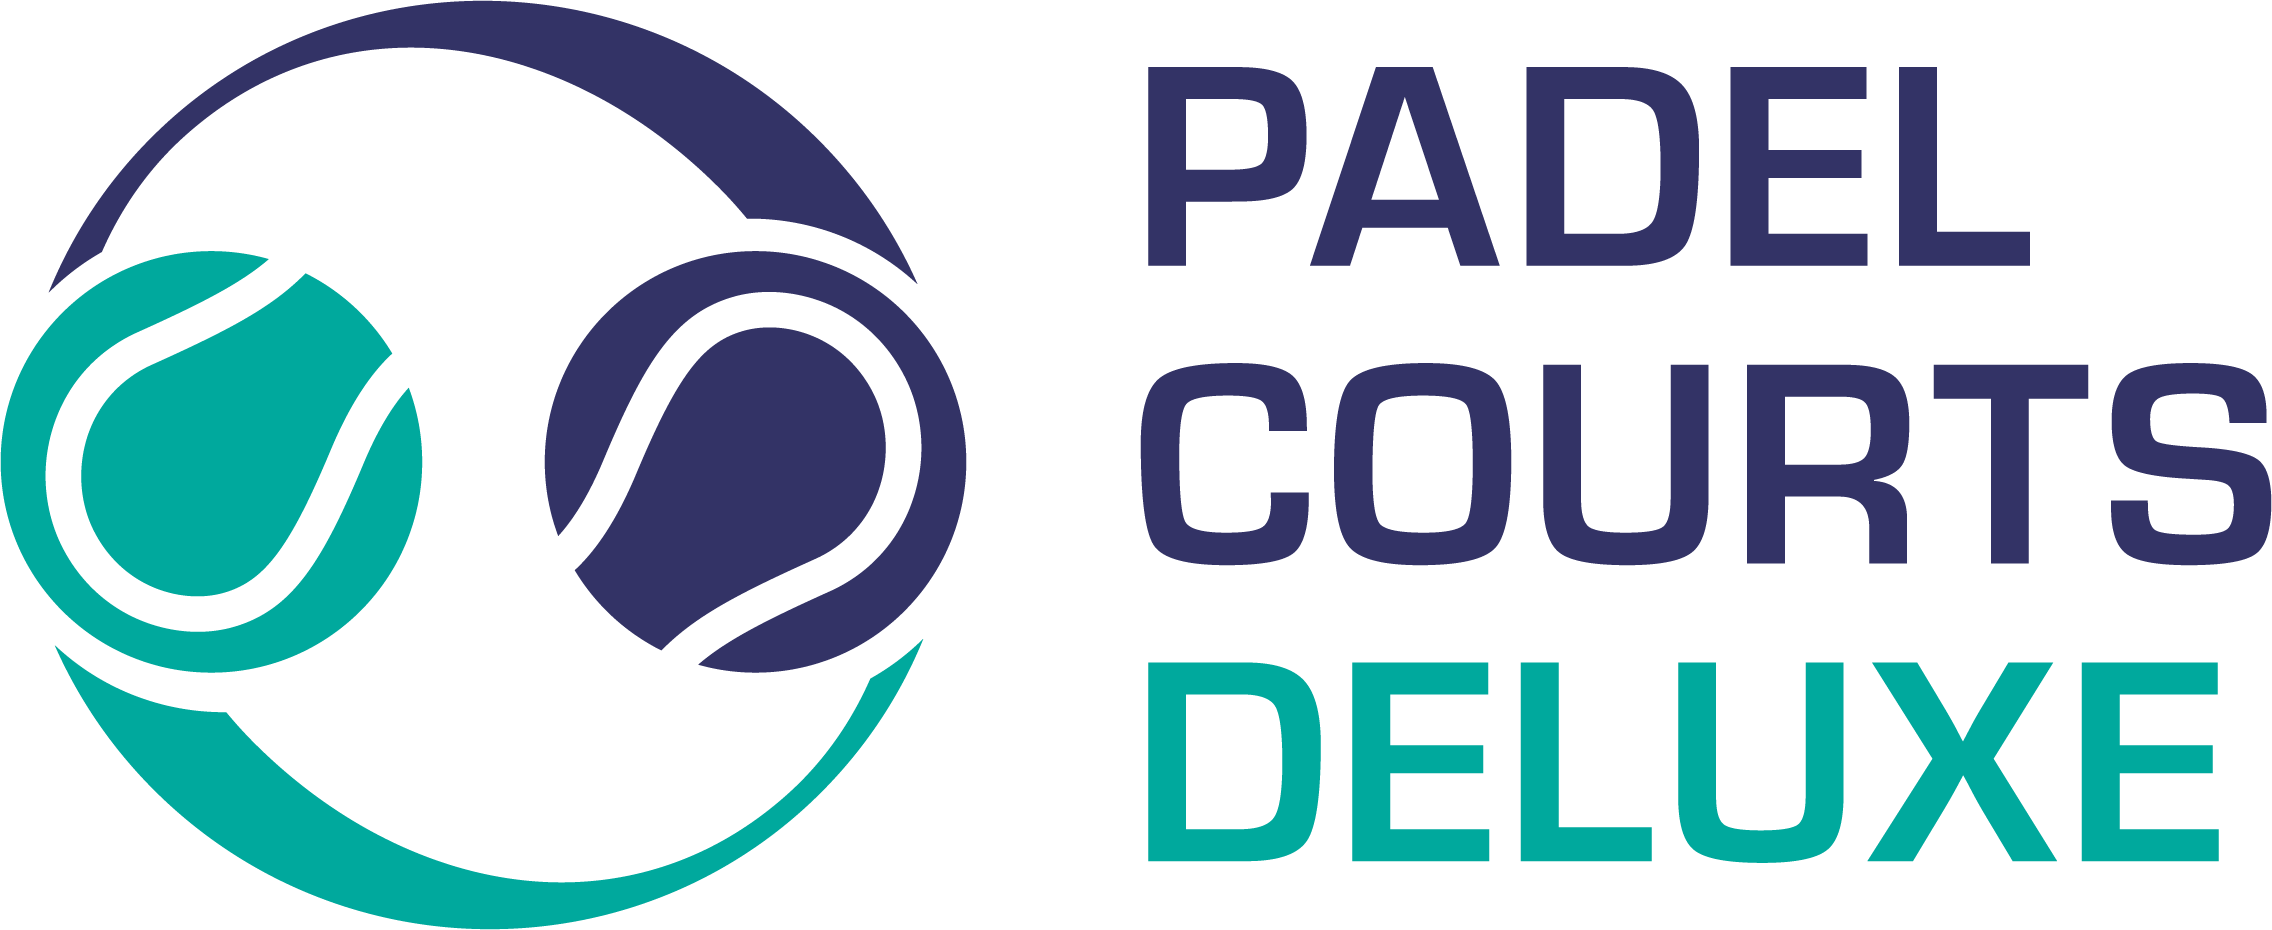 PCDLX Padel Courts Deluxe Logo